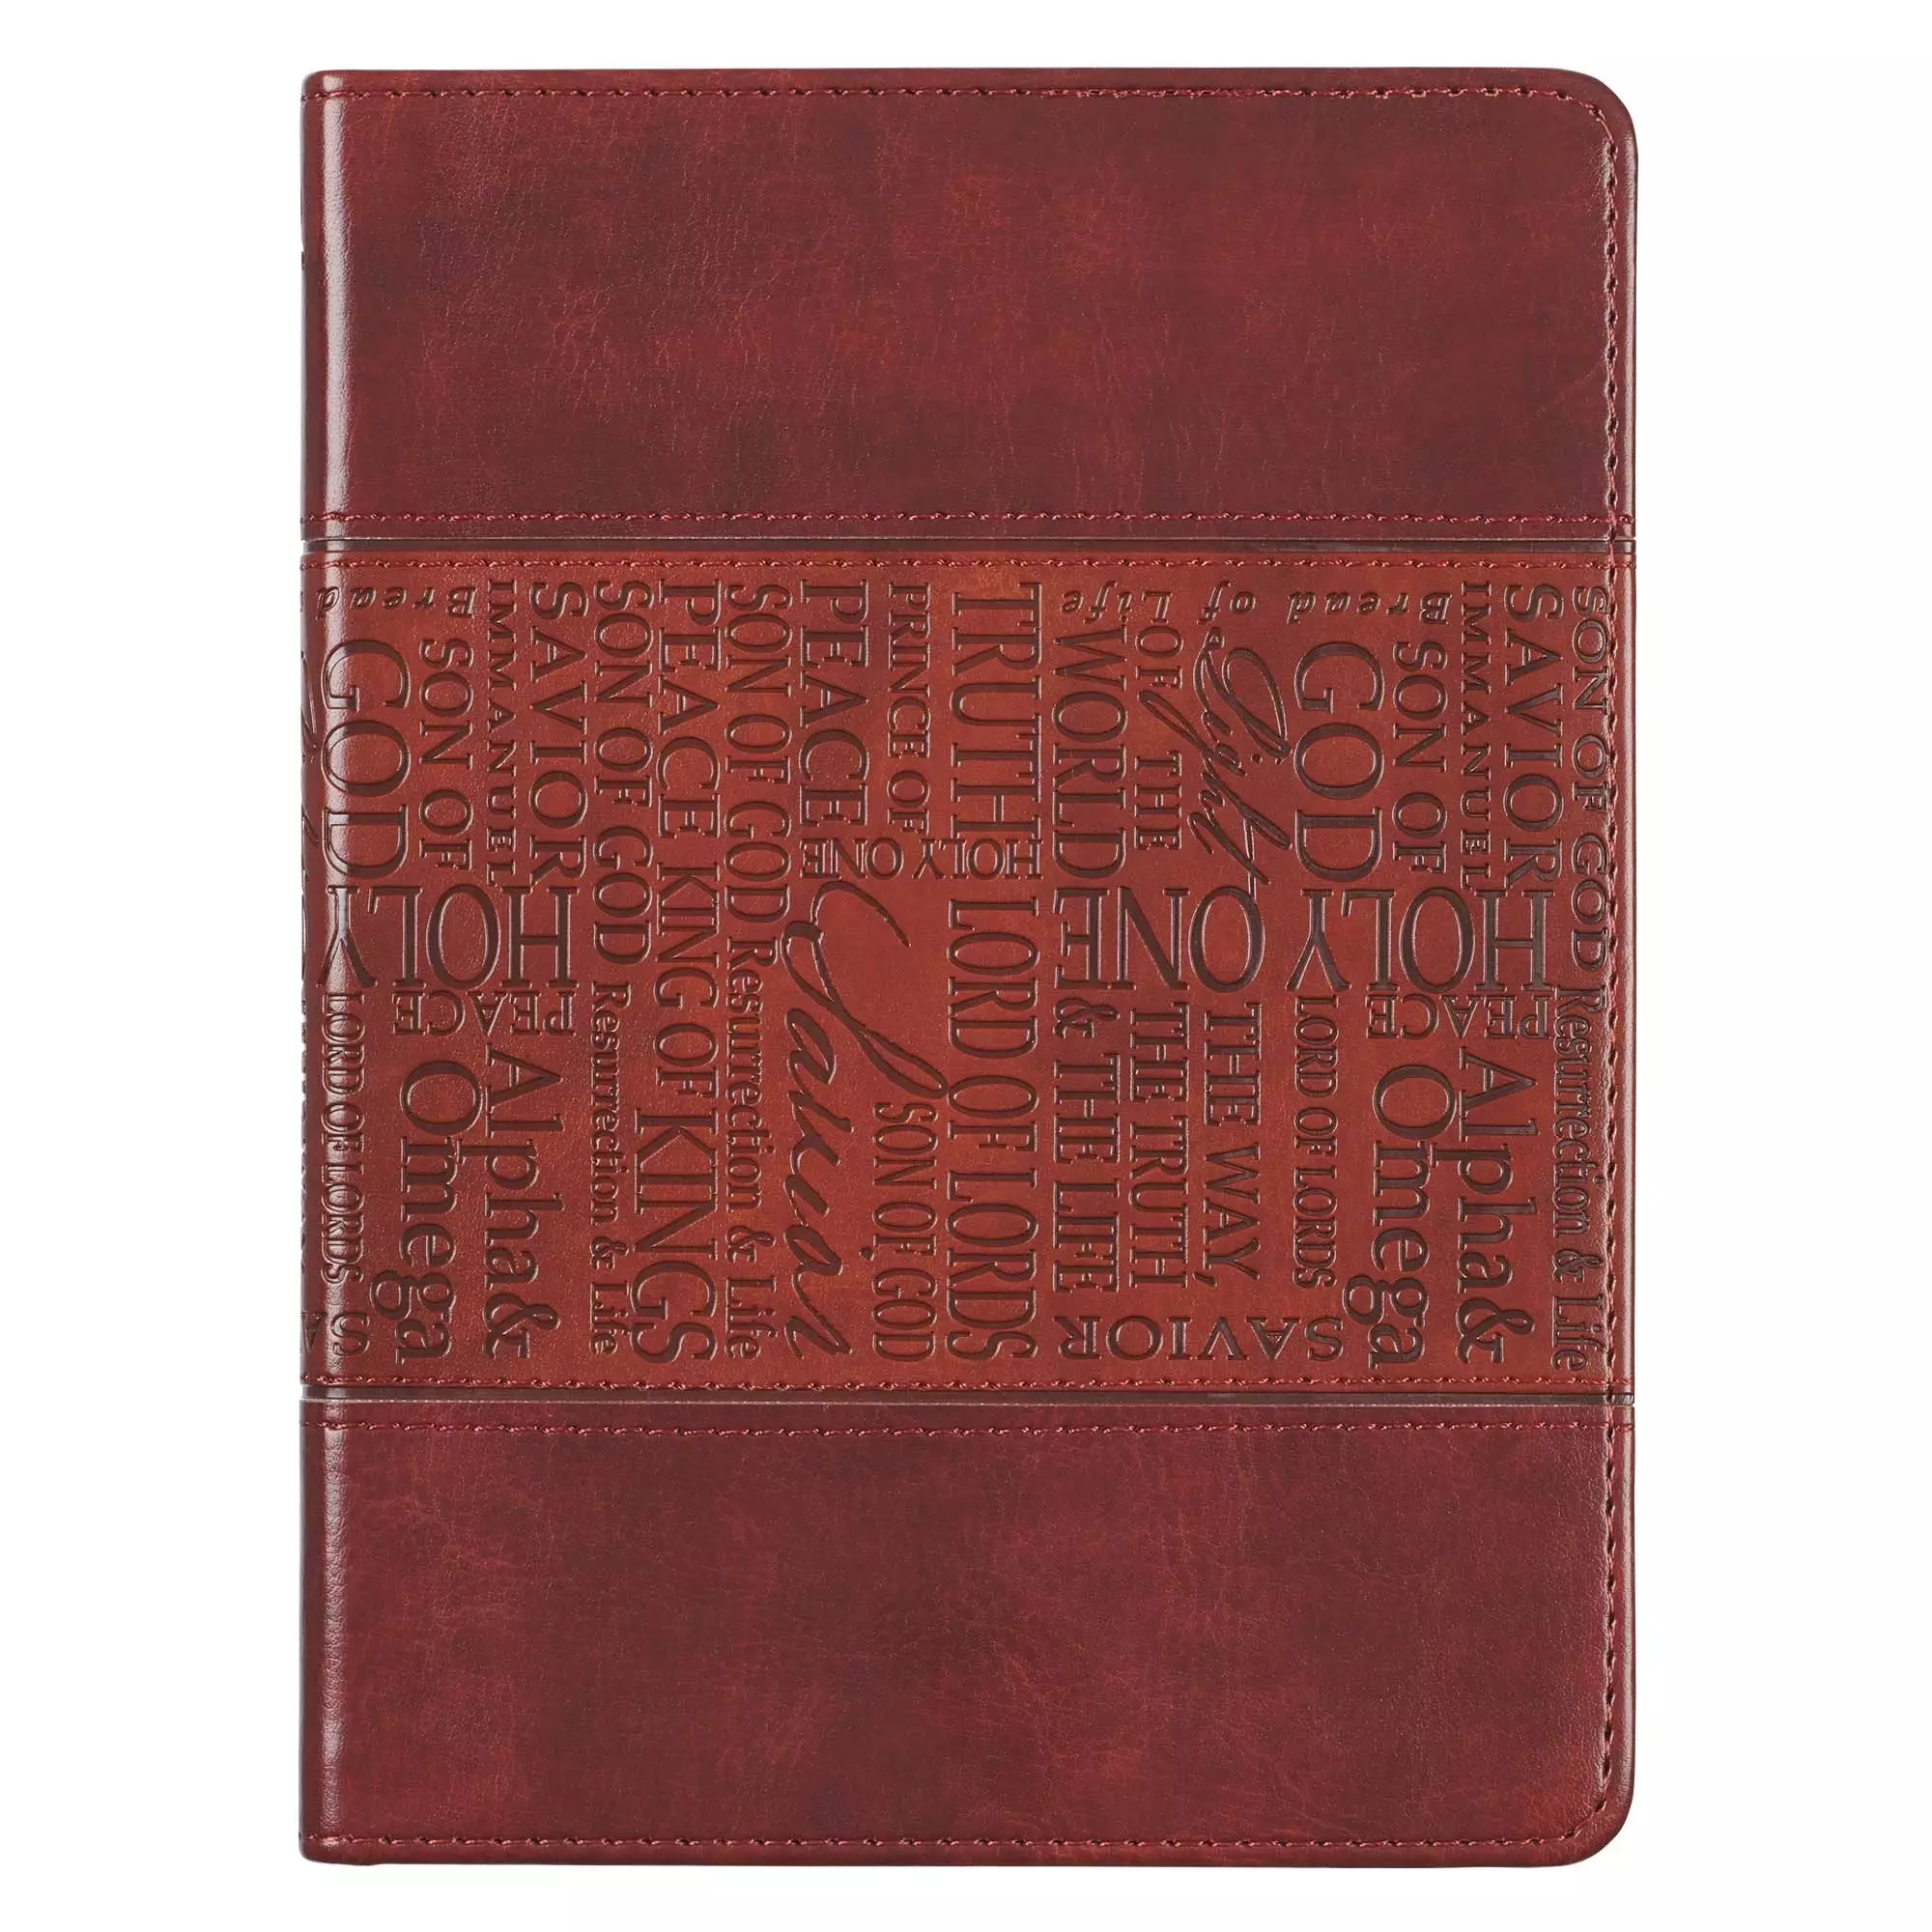 Names of Jesus (Brown) Flexcover Journal